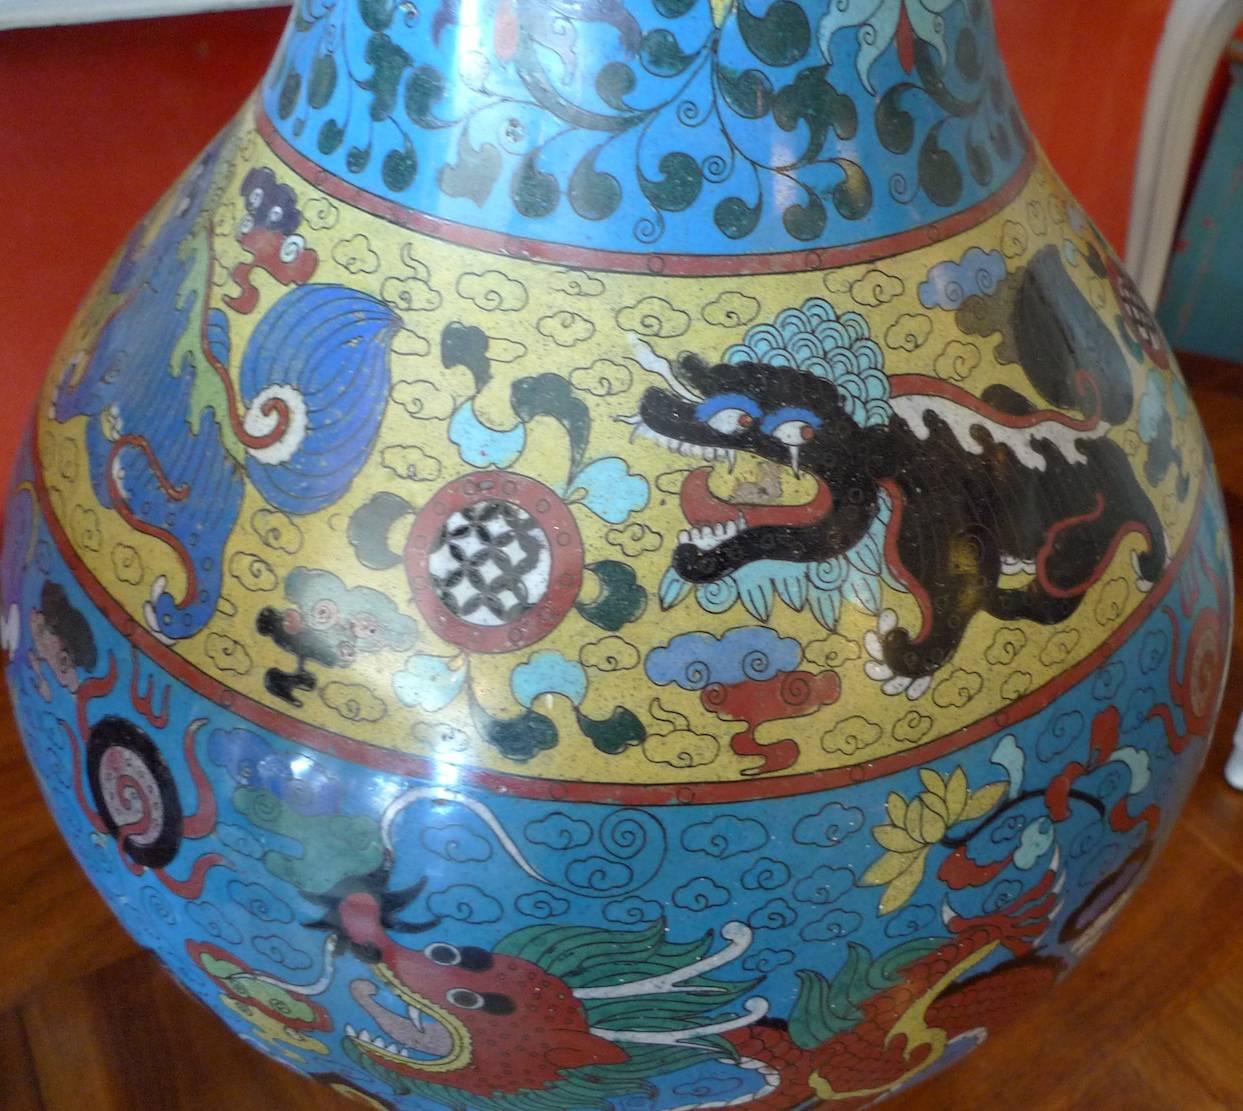 Chinese late 19th century large cloisonné enamel vase with decorative dragon motif. The top and bottom are banded with brass.
Measures: Height 23.50”; diameter 16.50”
$2,500
$2,125 trade.